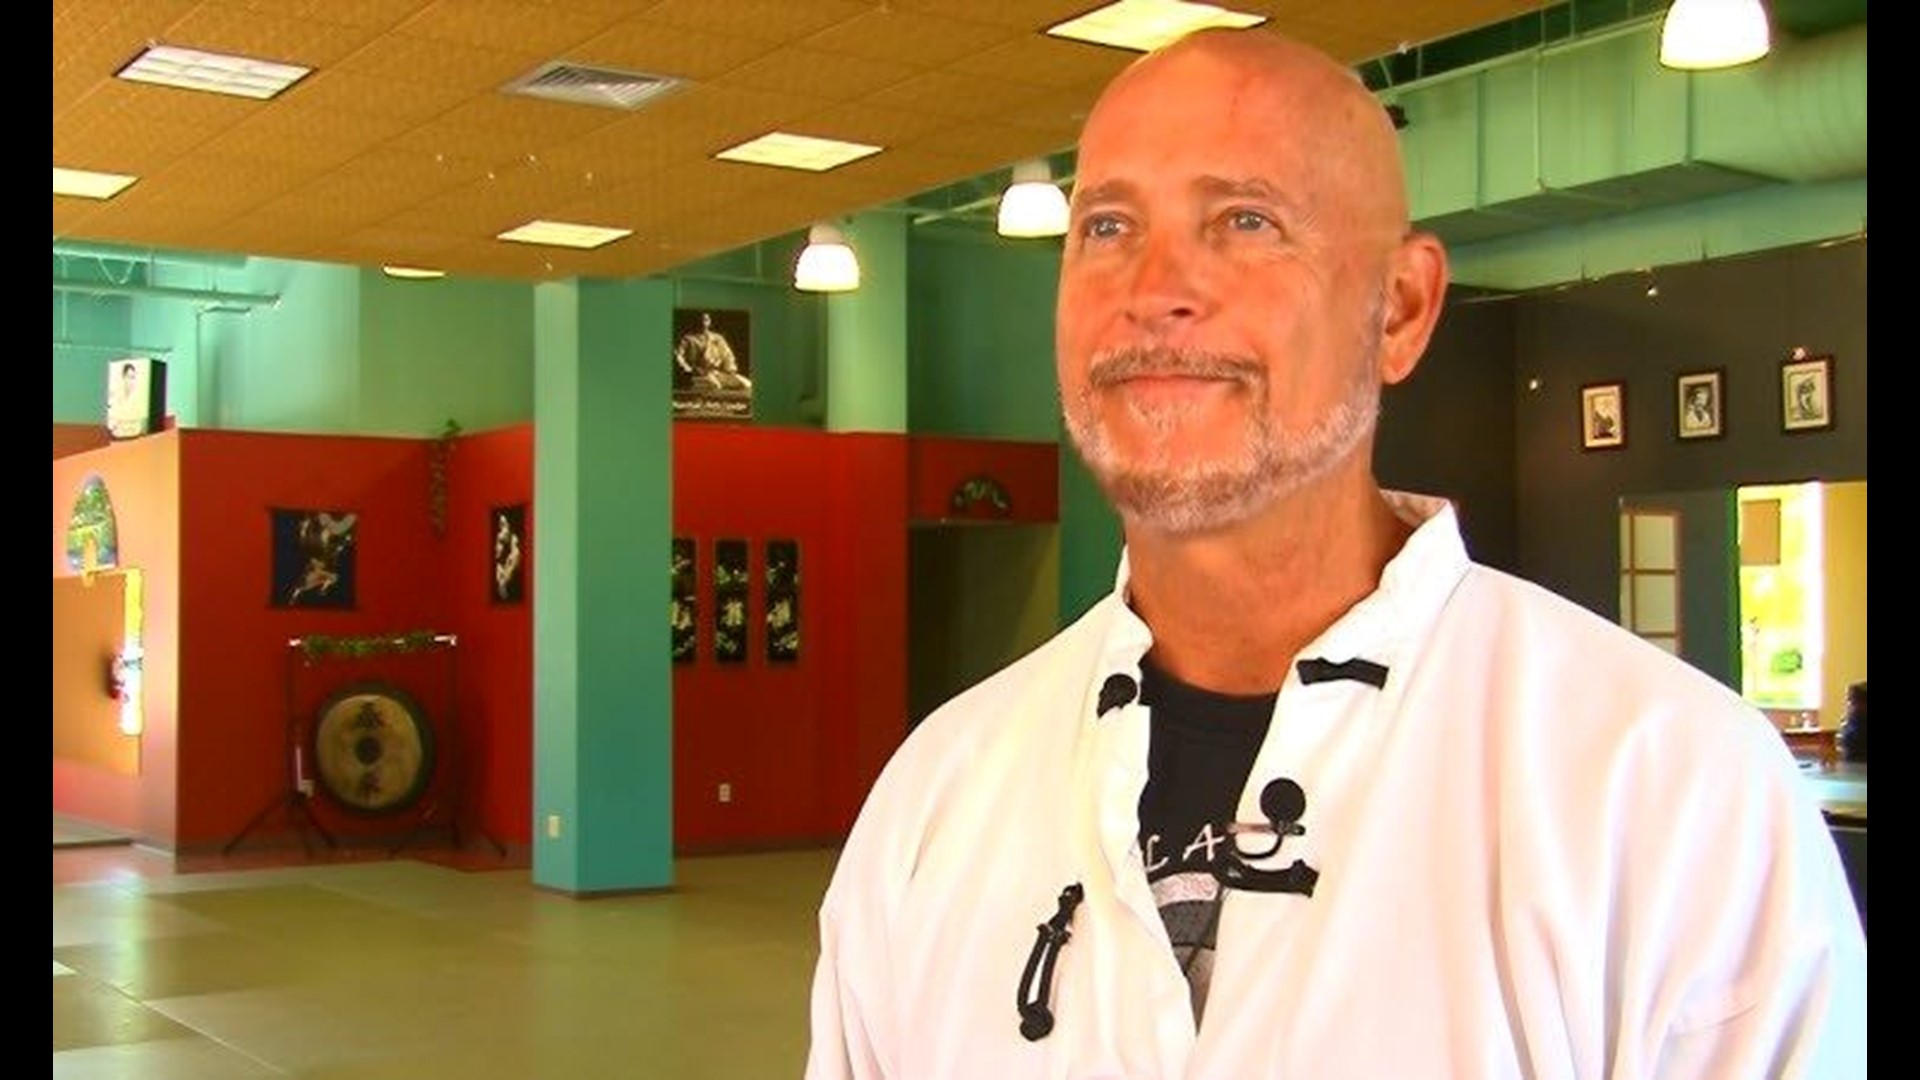 Martial Arts Center: Knowing how to fight an attacker can save your